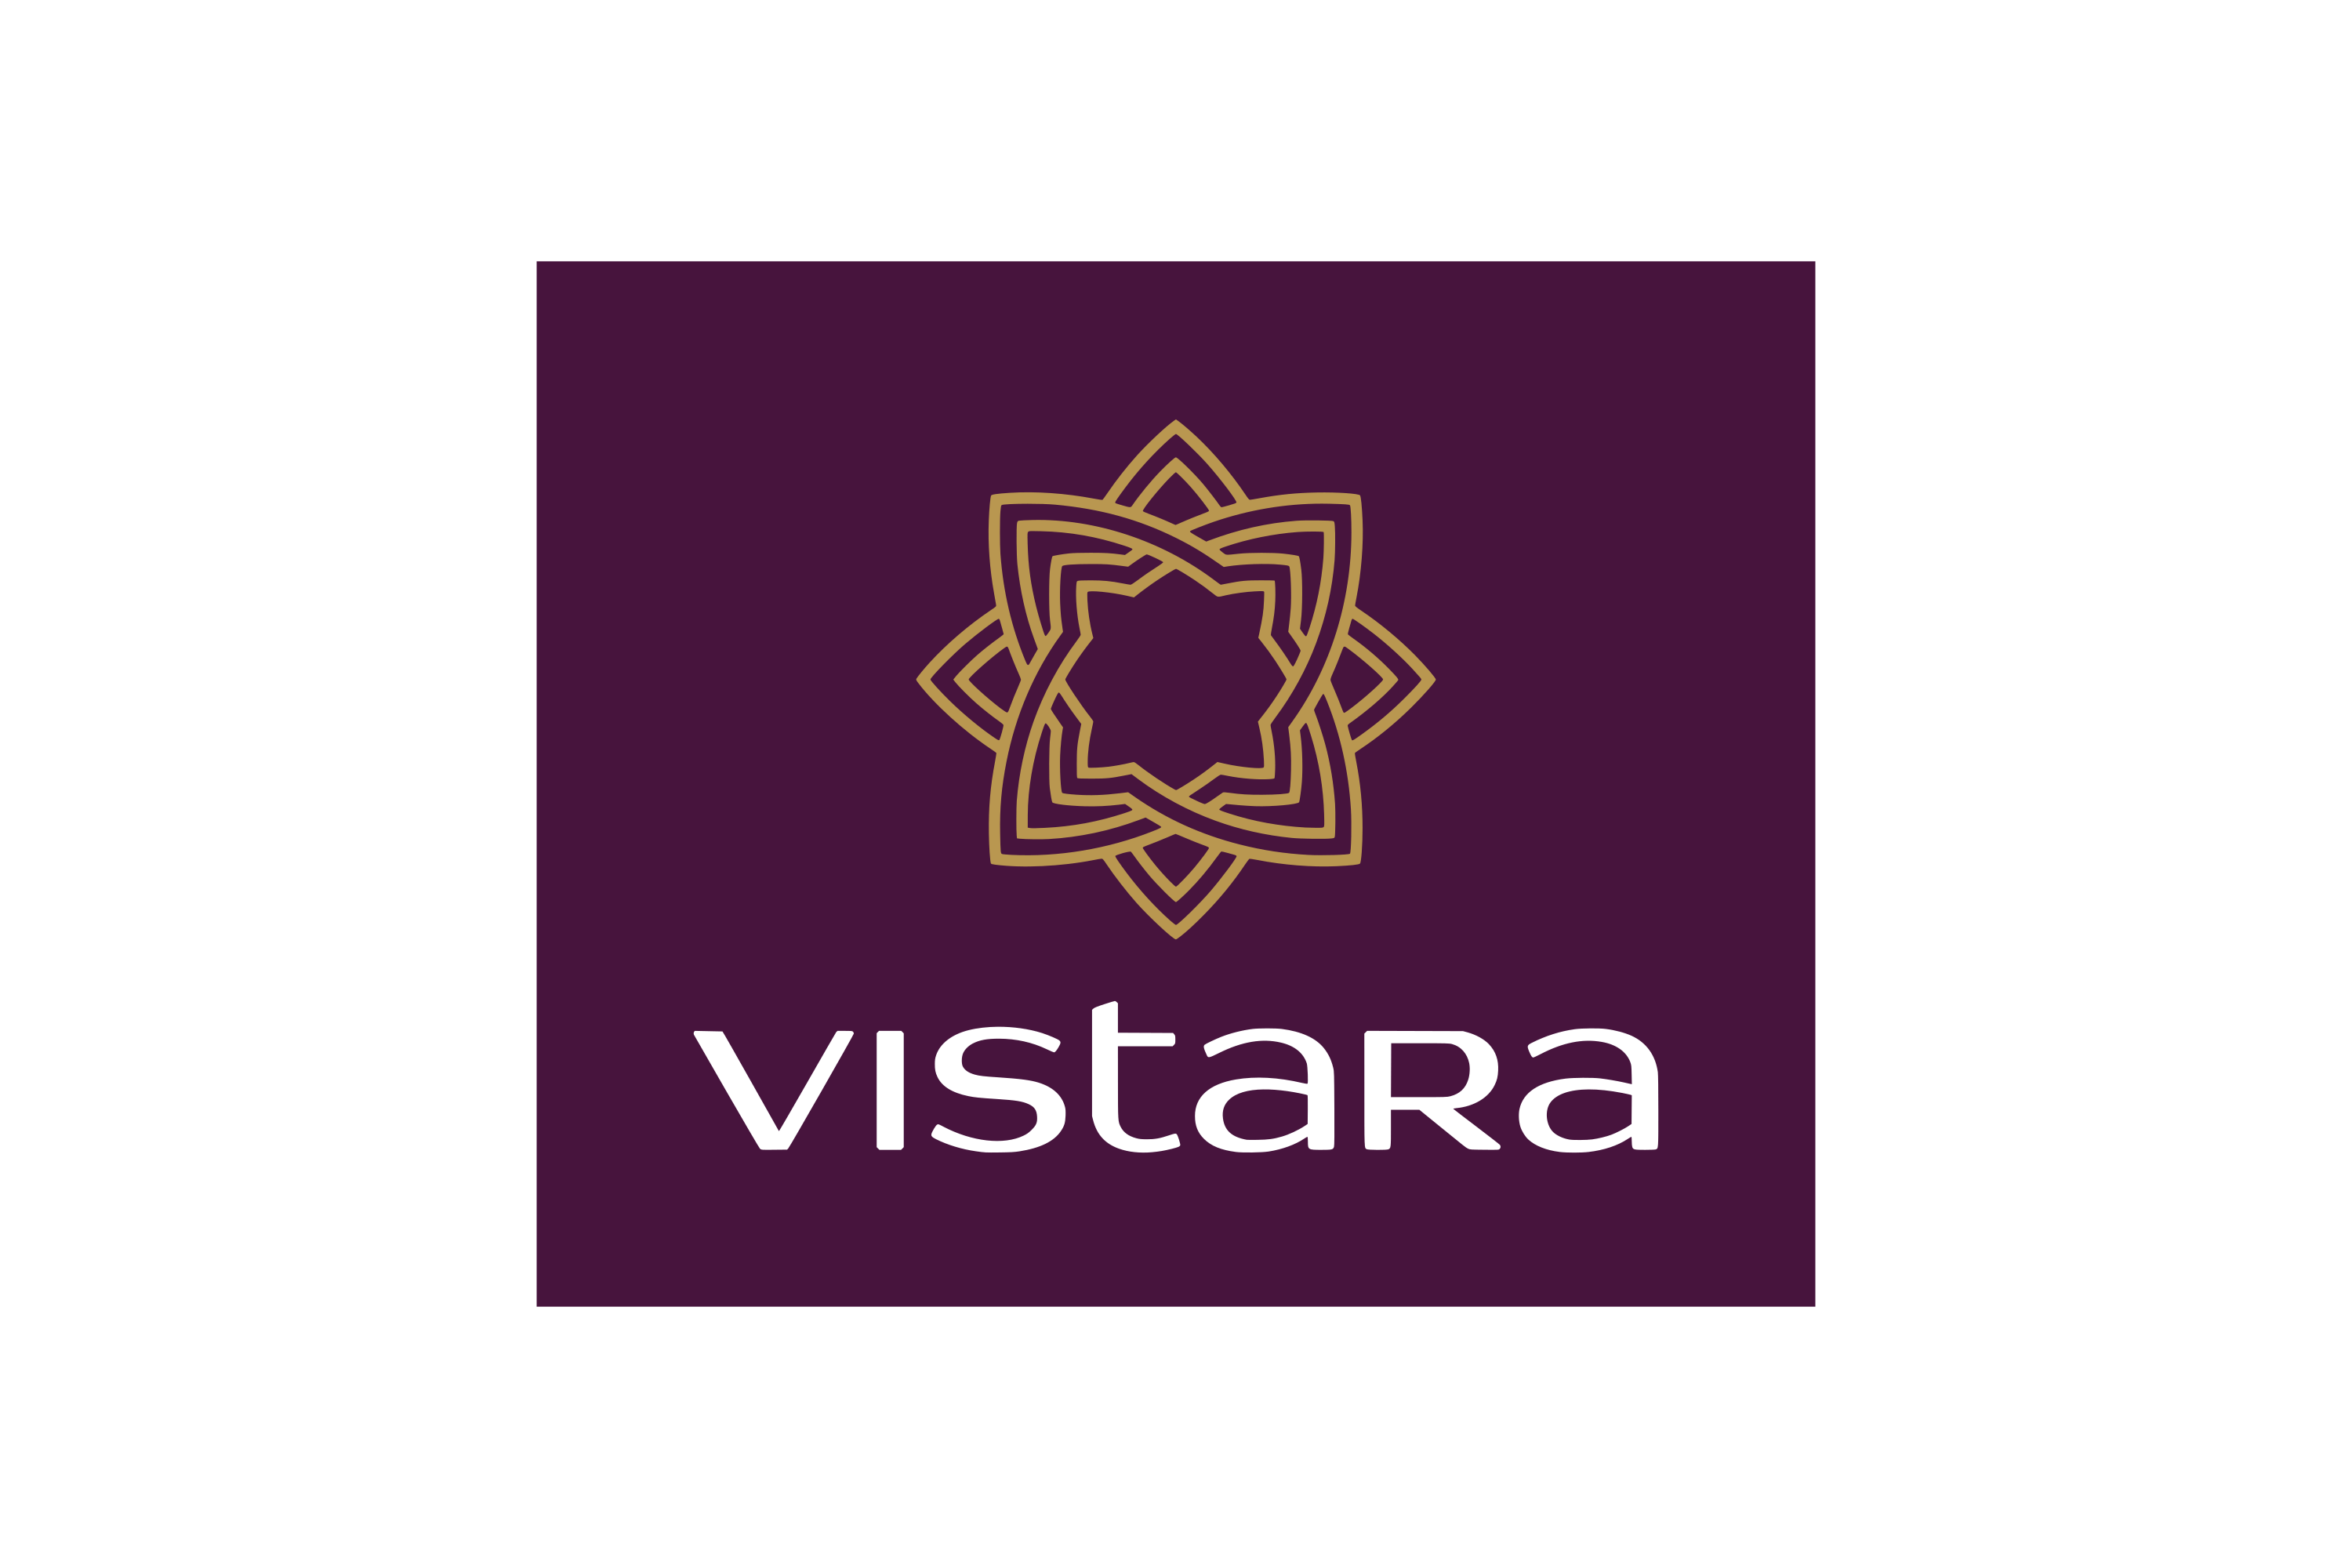 Vistara to Become India's First Airline to Feature In-flight Internet -  Avionics International